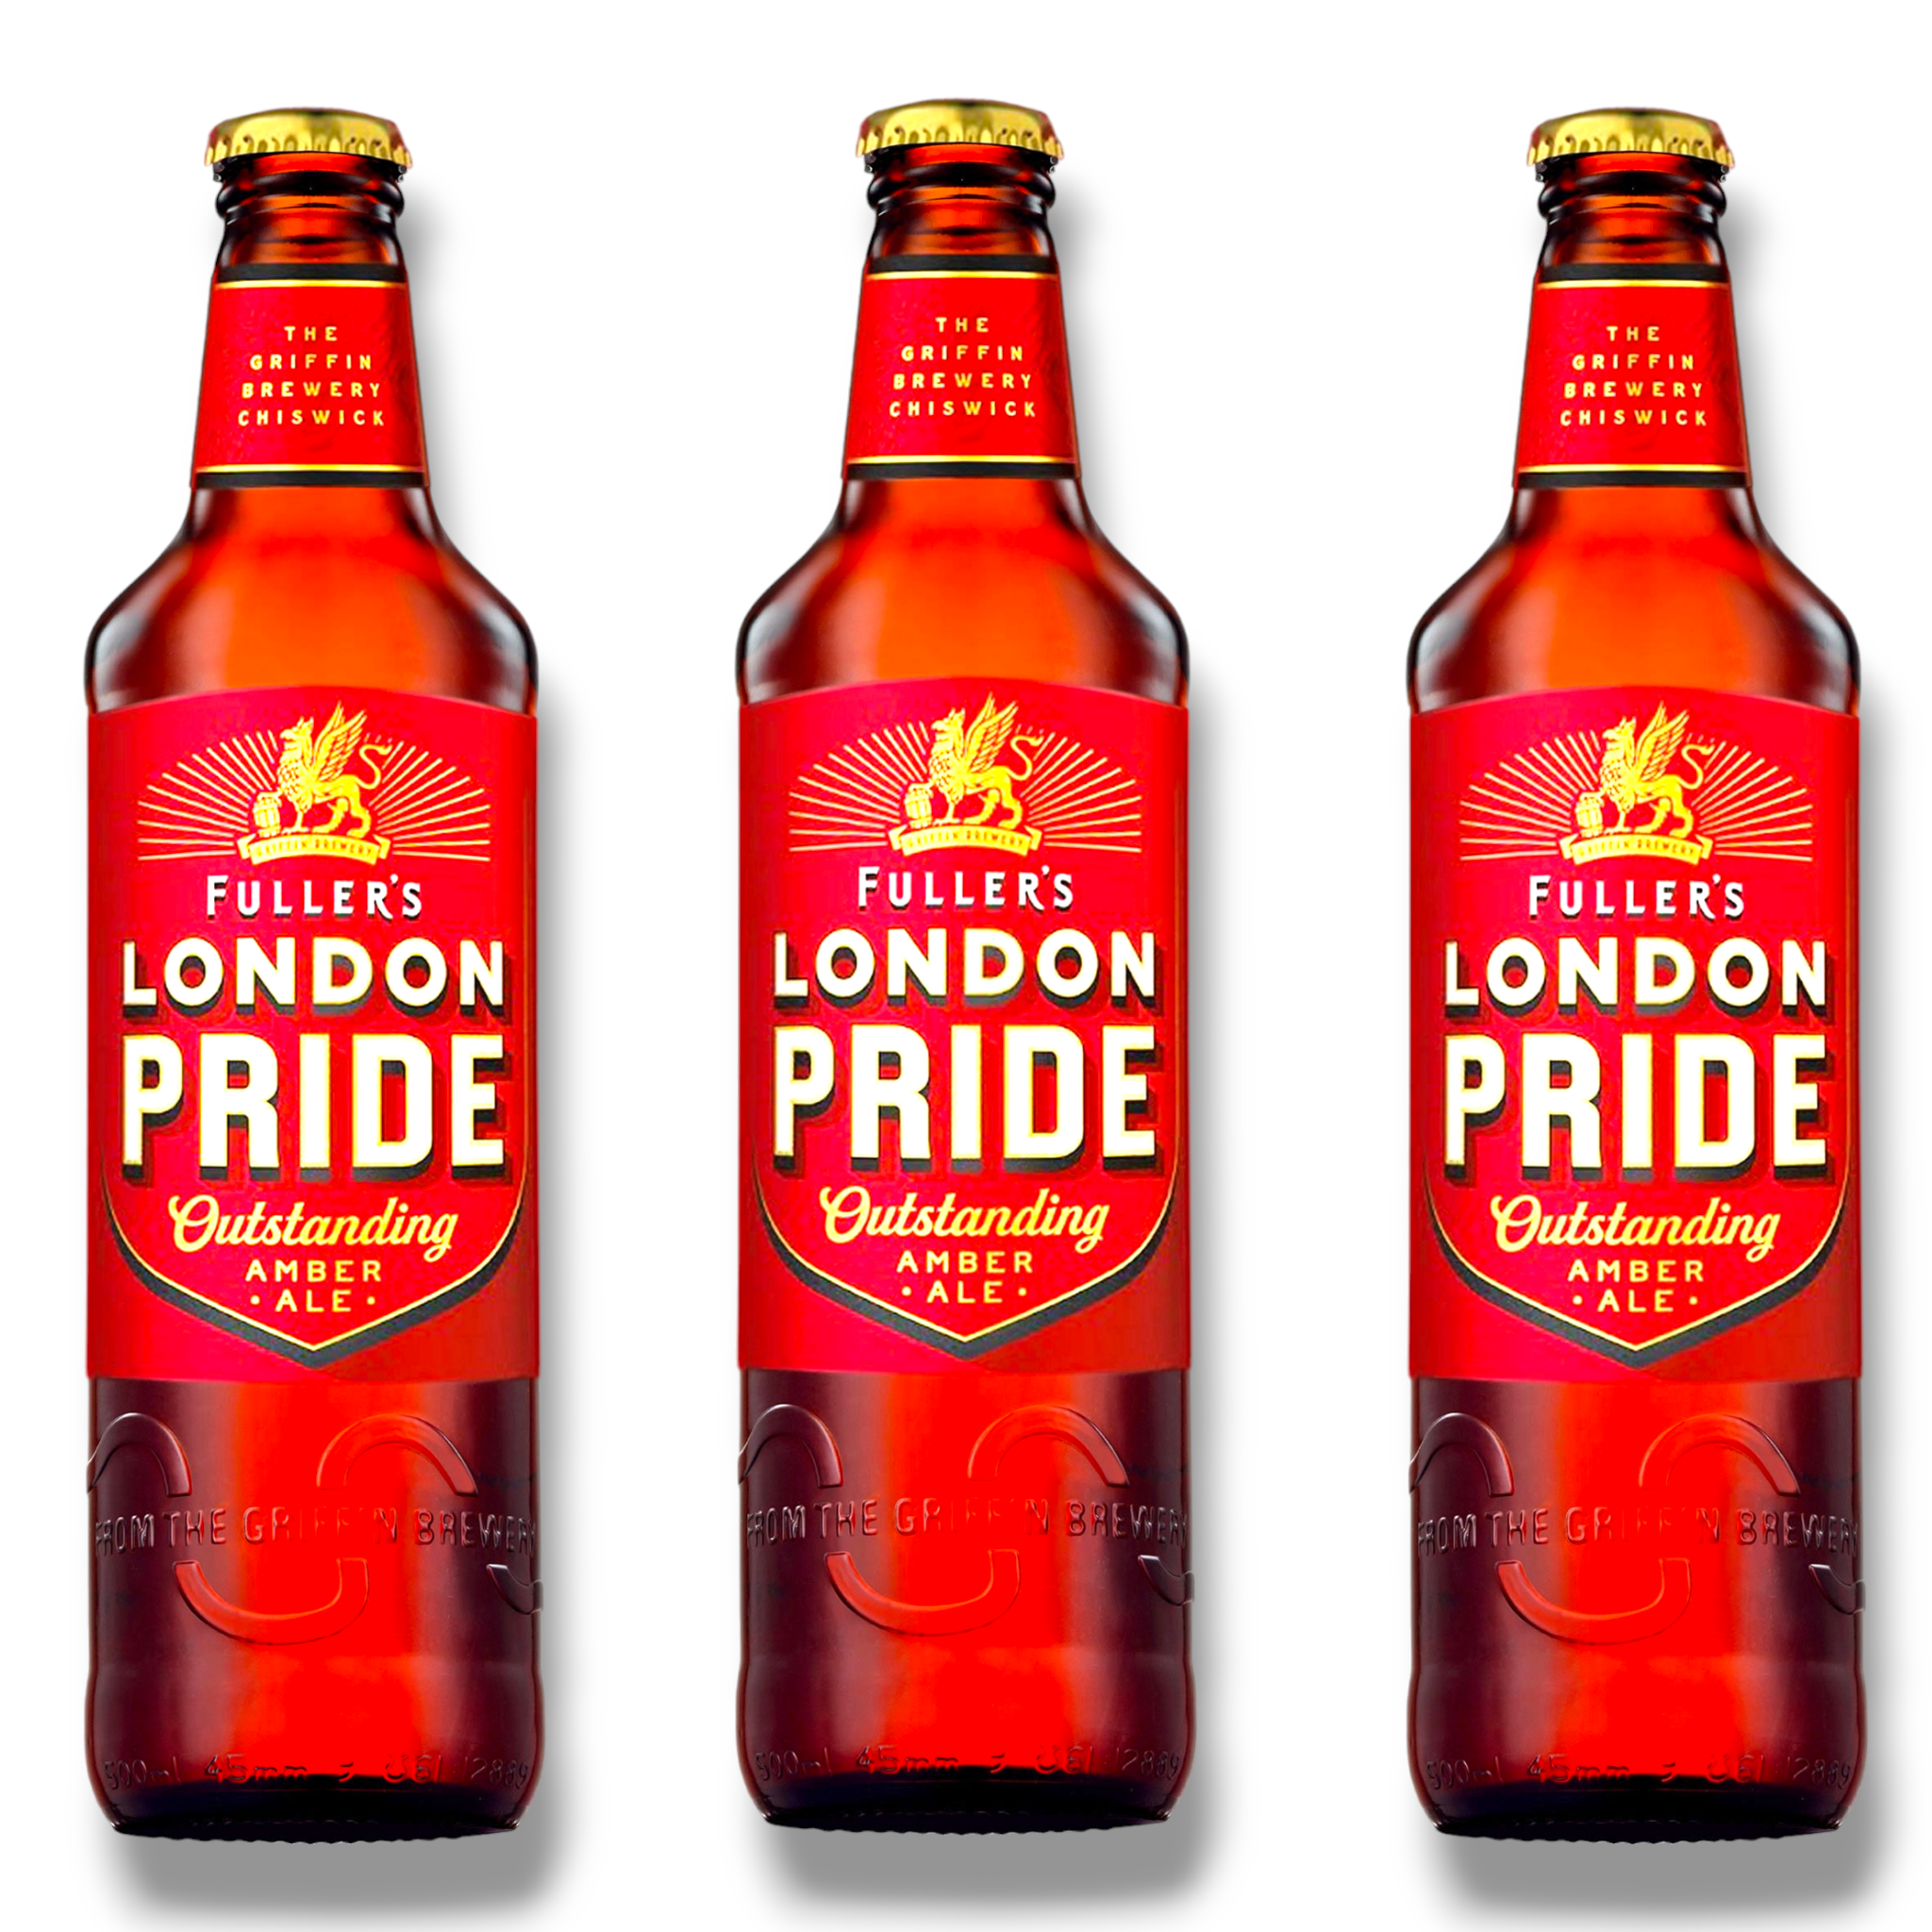 London Pride Outstanding Amber Ale 0,5l-  Englisches Ale mit 4,7% Vol.